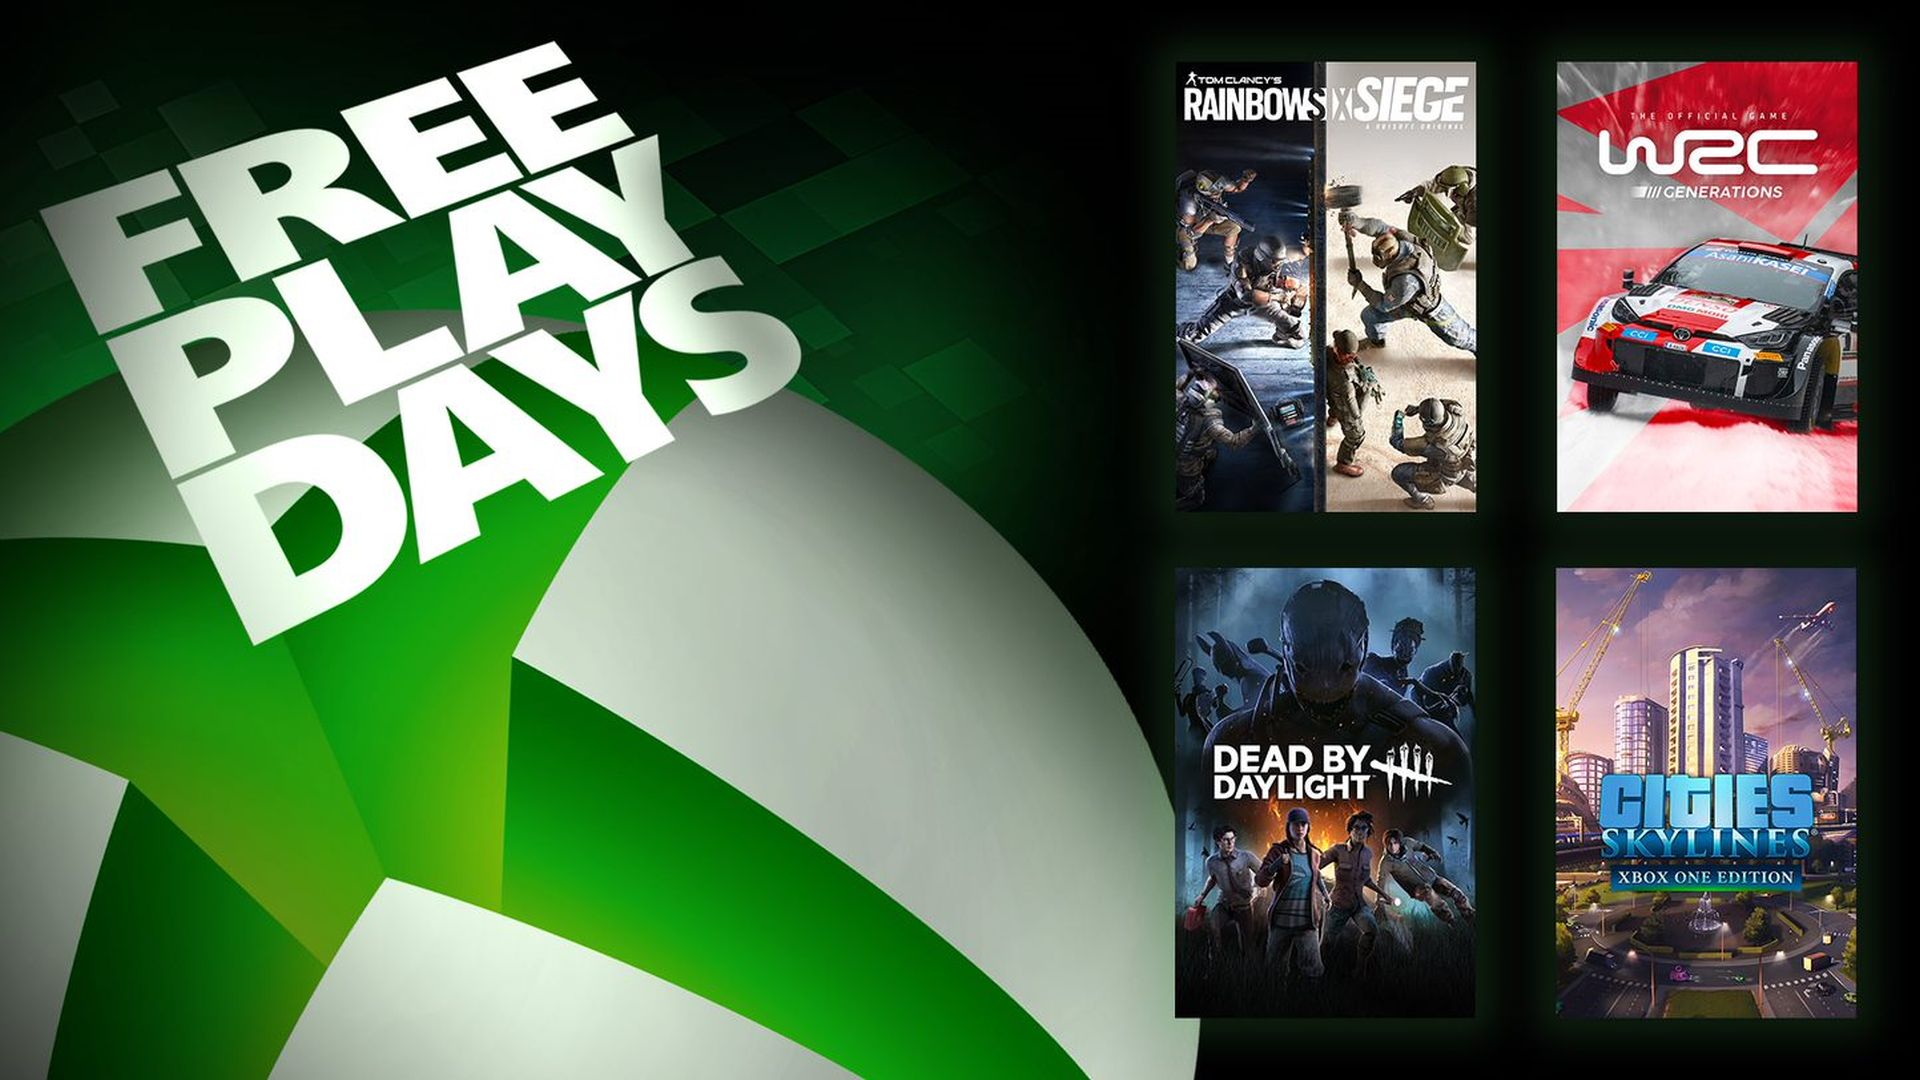 Gratis spilledage – Tom Clancy's Rainbow Six Siege, WRC Generations, Dead by Daylight og Cities: Skylines – Xbox One Edition